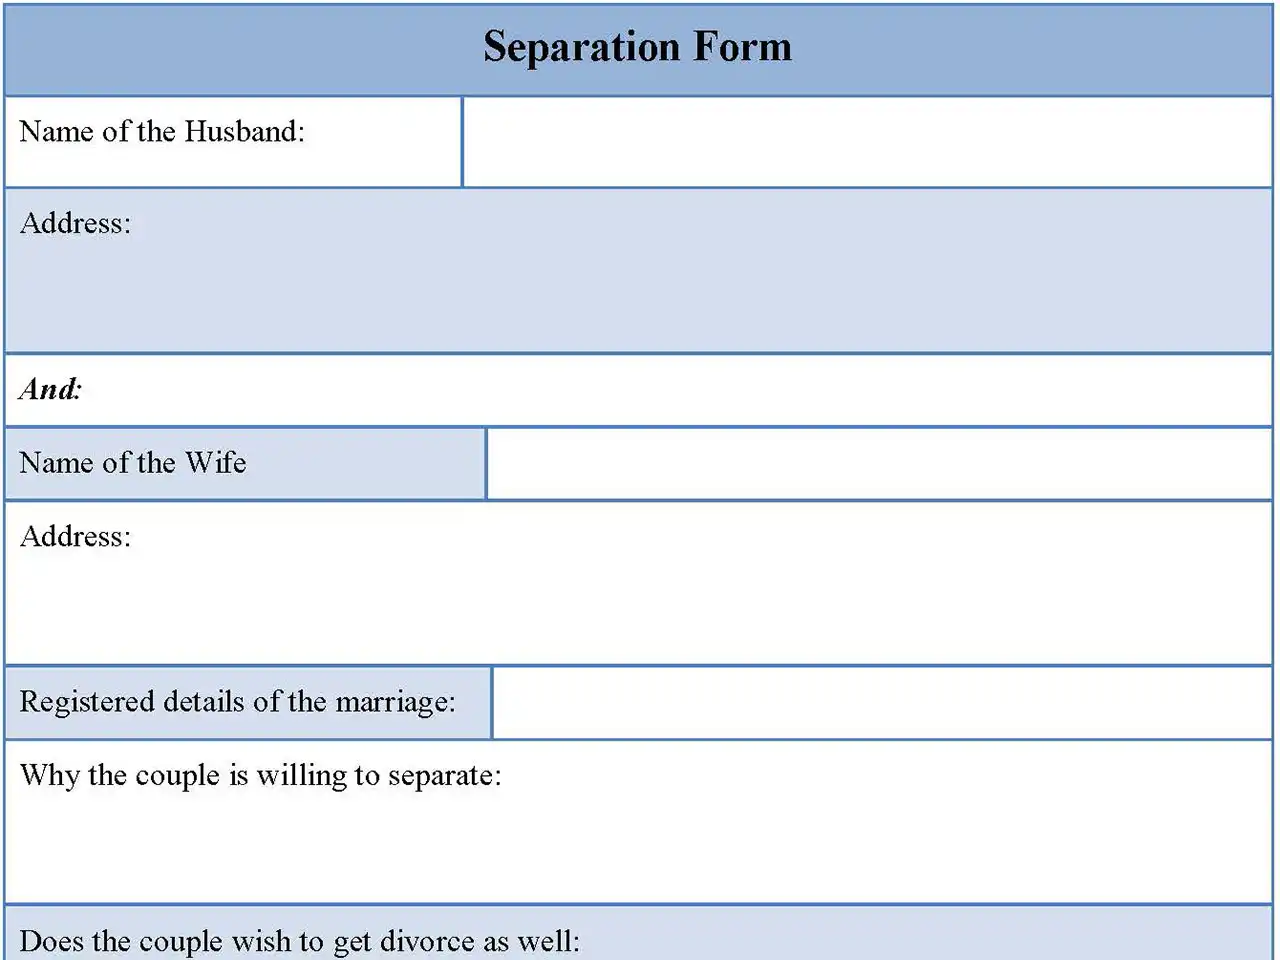 Separation form template